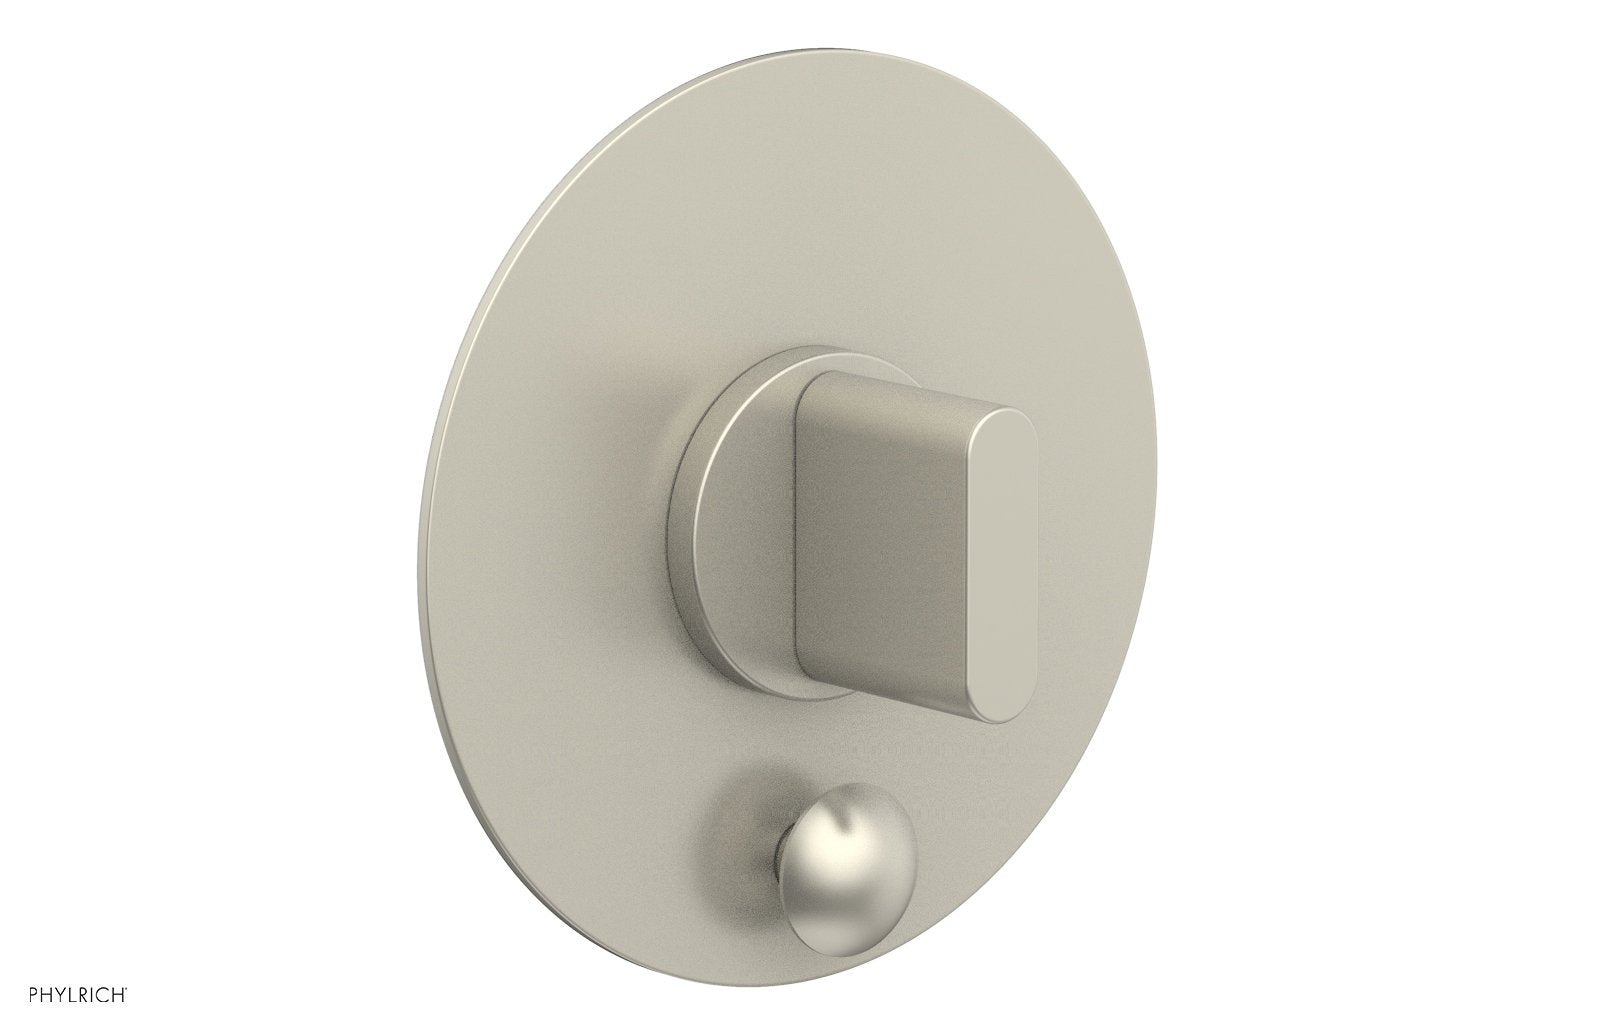 Phylrich ROND Pressure Balance Shower Plate with Diverter and Handle Trim Set